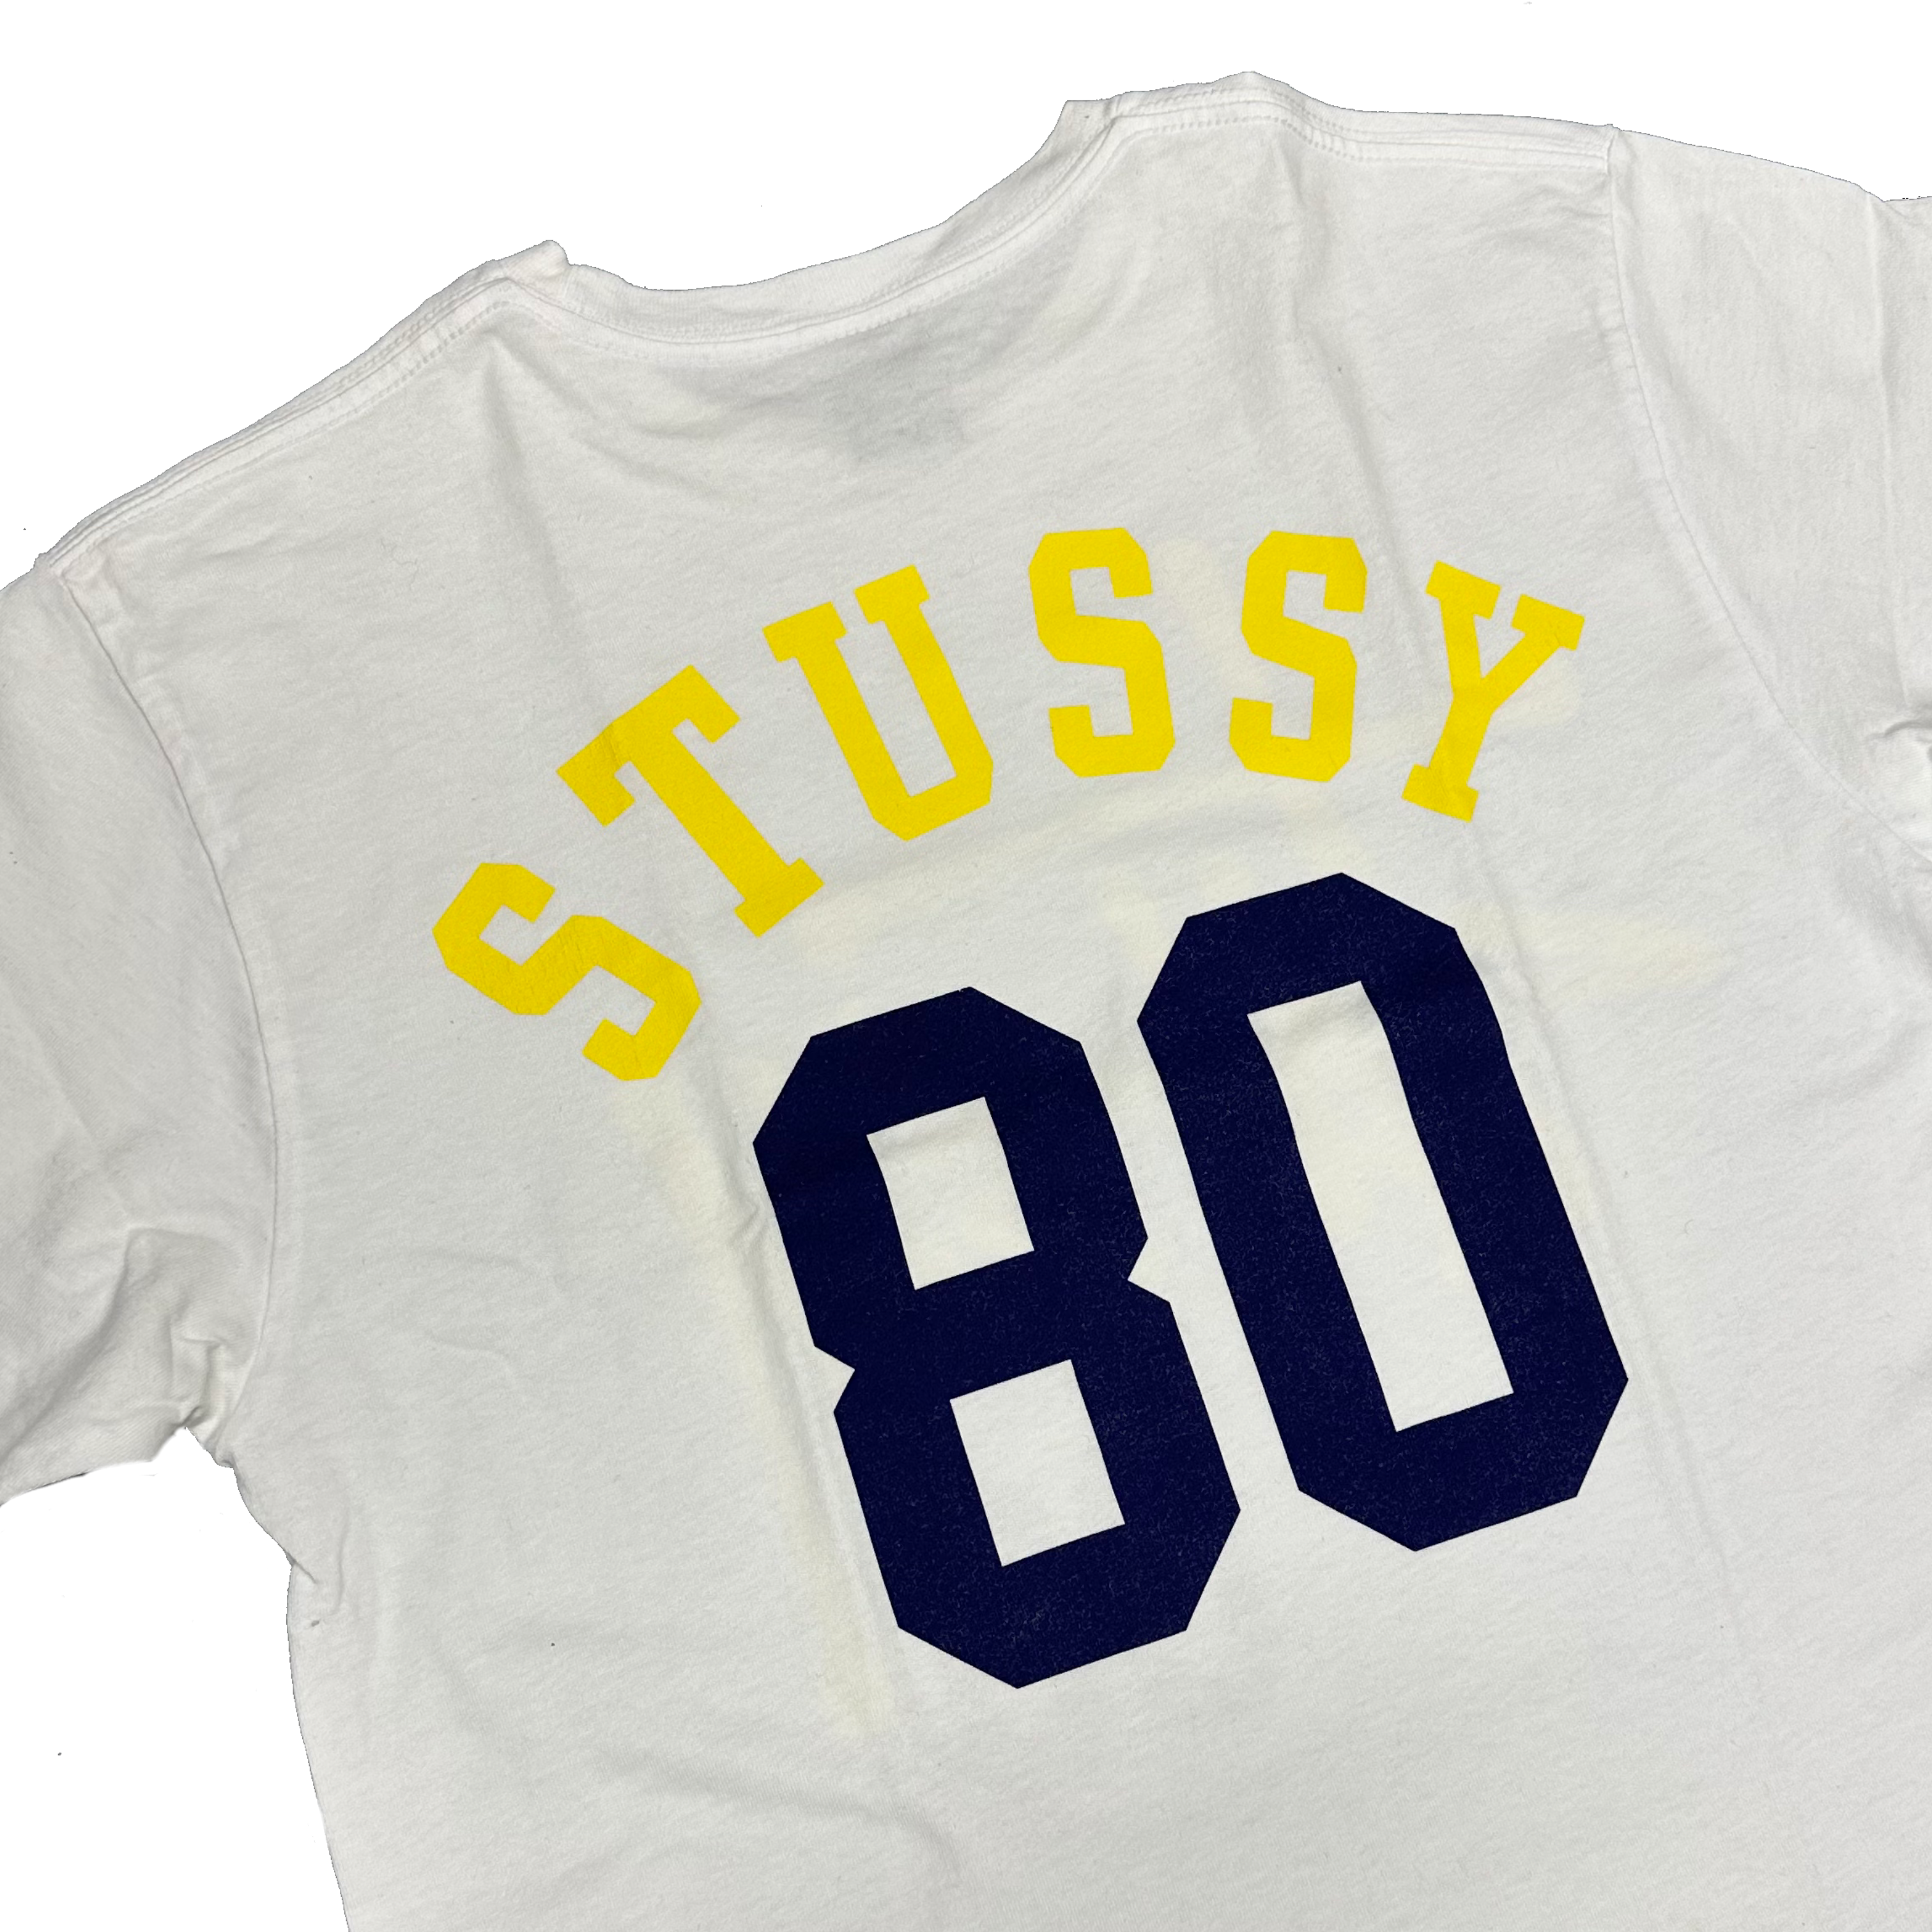 Stüssy Spellout Jersey T-Shirt In White ( M )